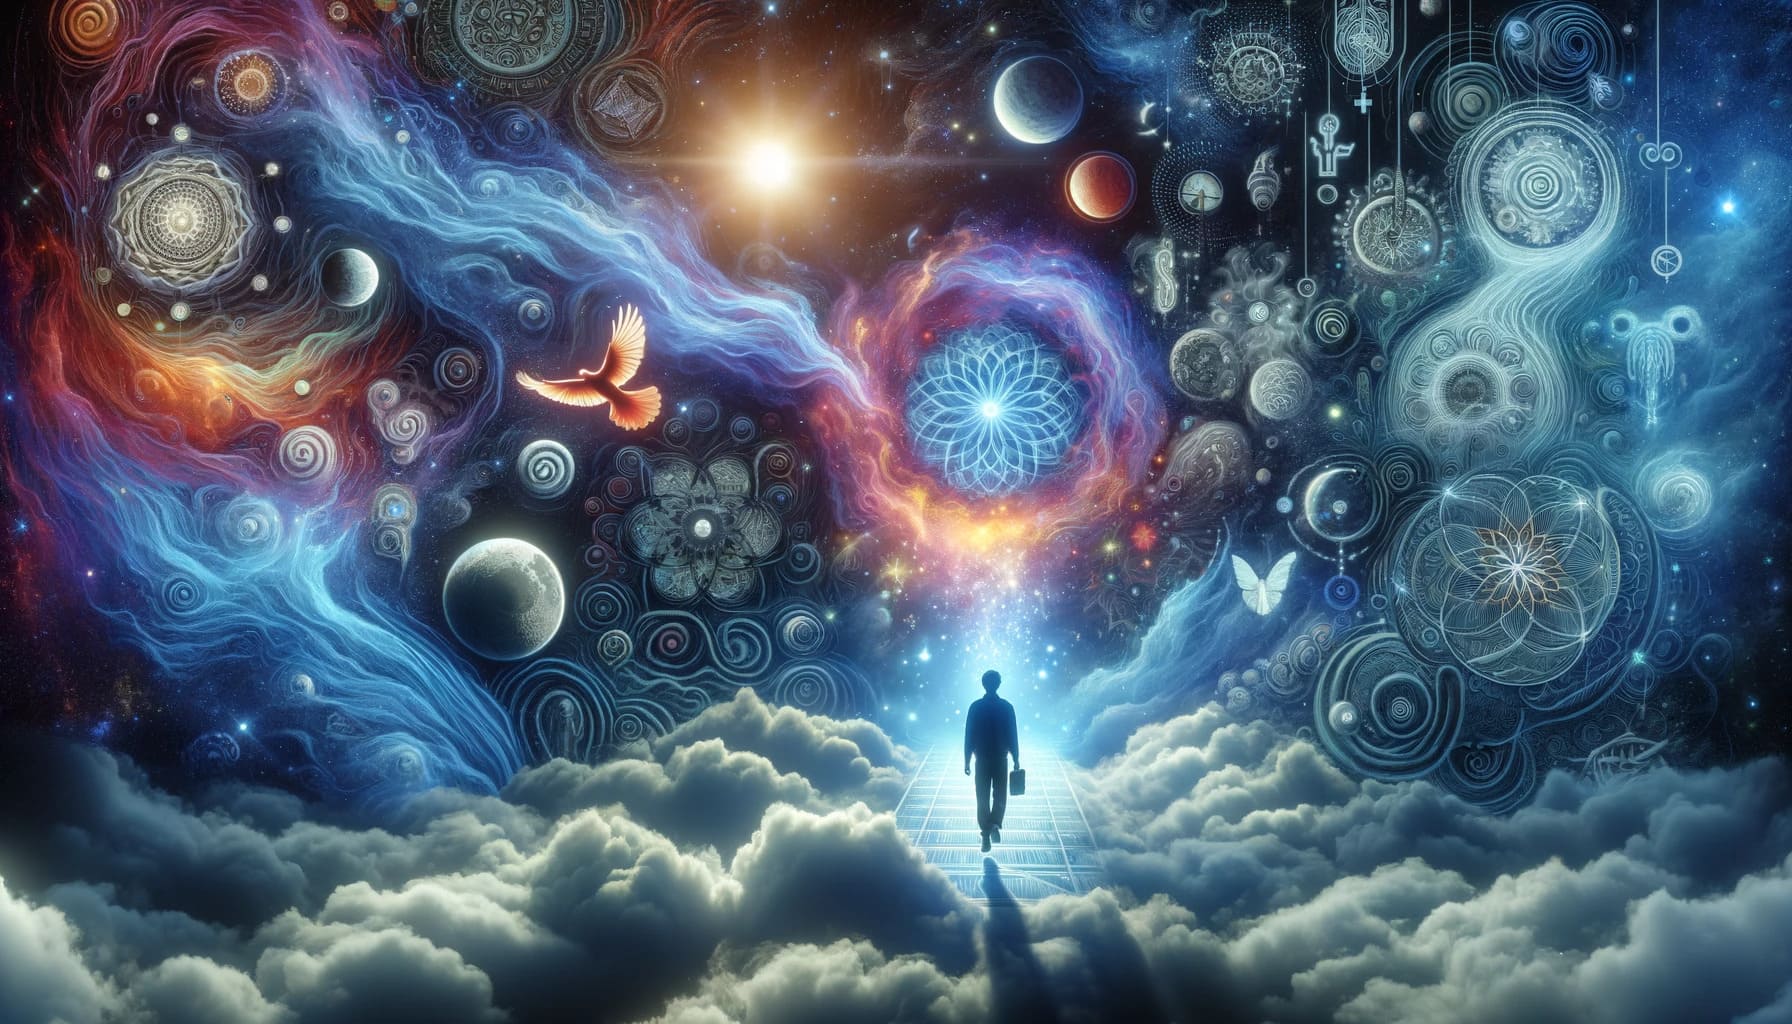 A vivid introspective image depicting a person waking up from a dream surrounded by dreamlike symbols and narratives. The scene should convey a